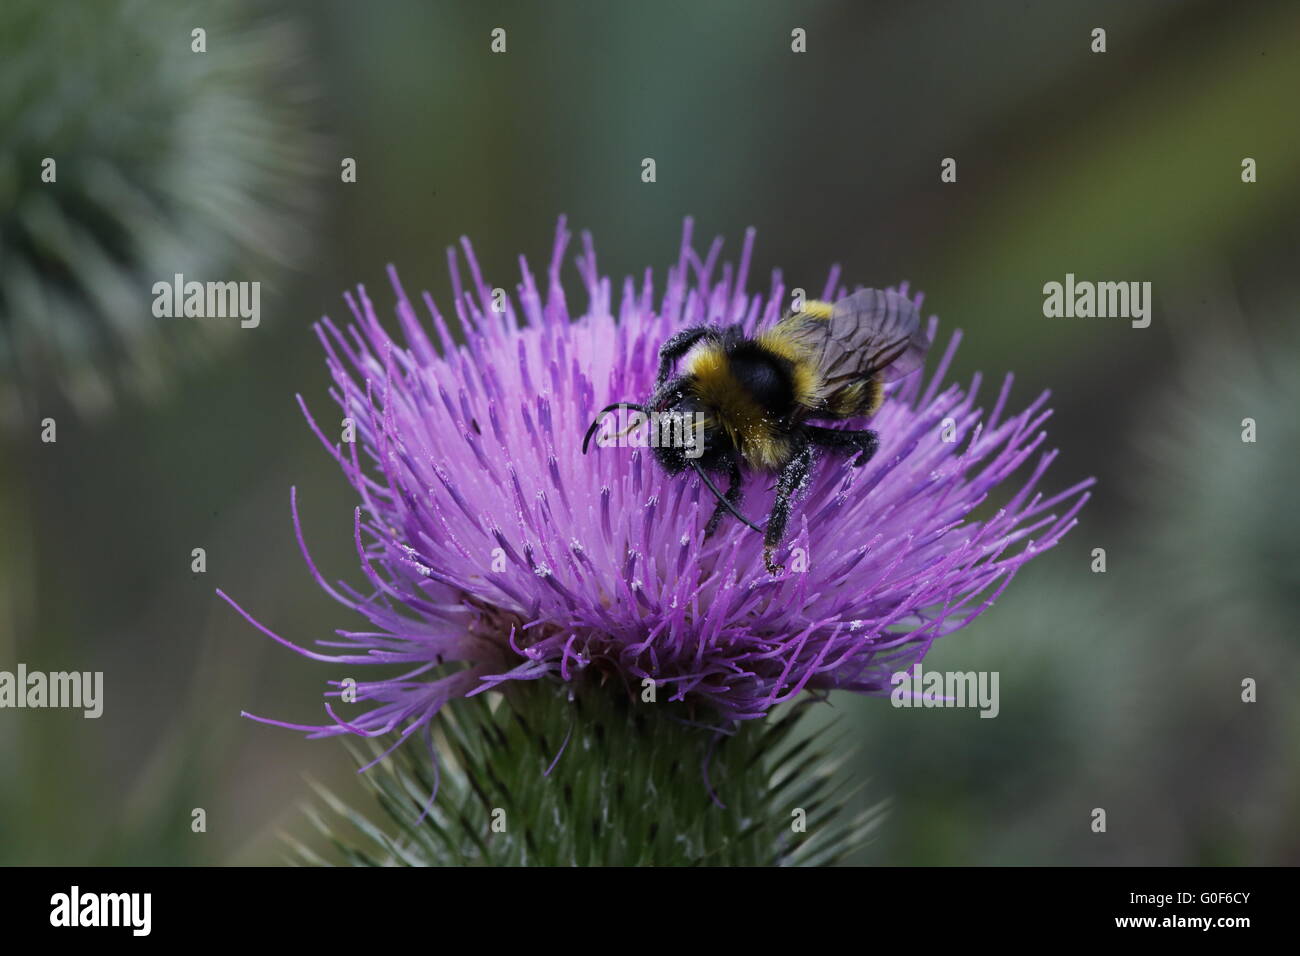 Bumble bee on a thistle flower Stock Photo